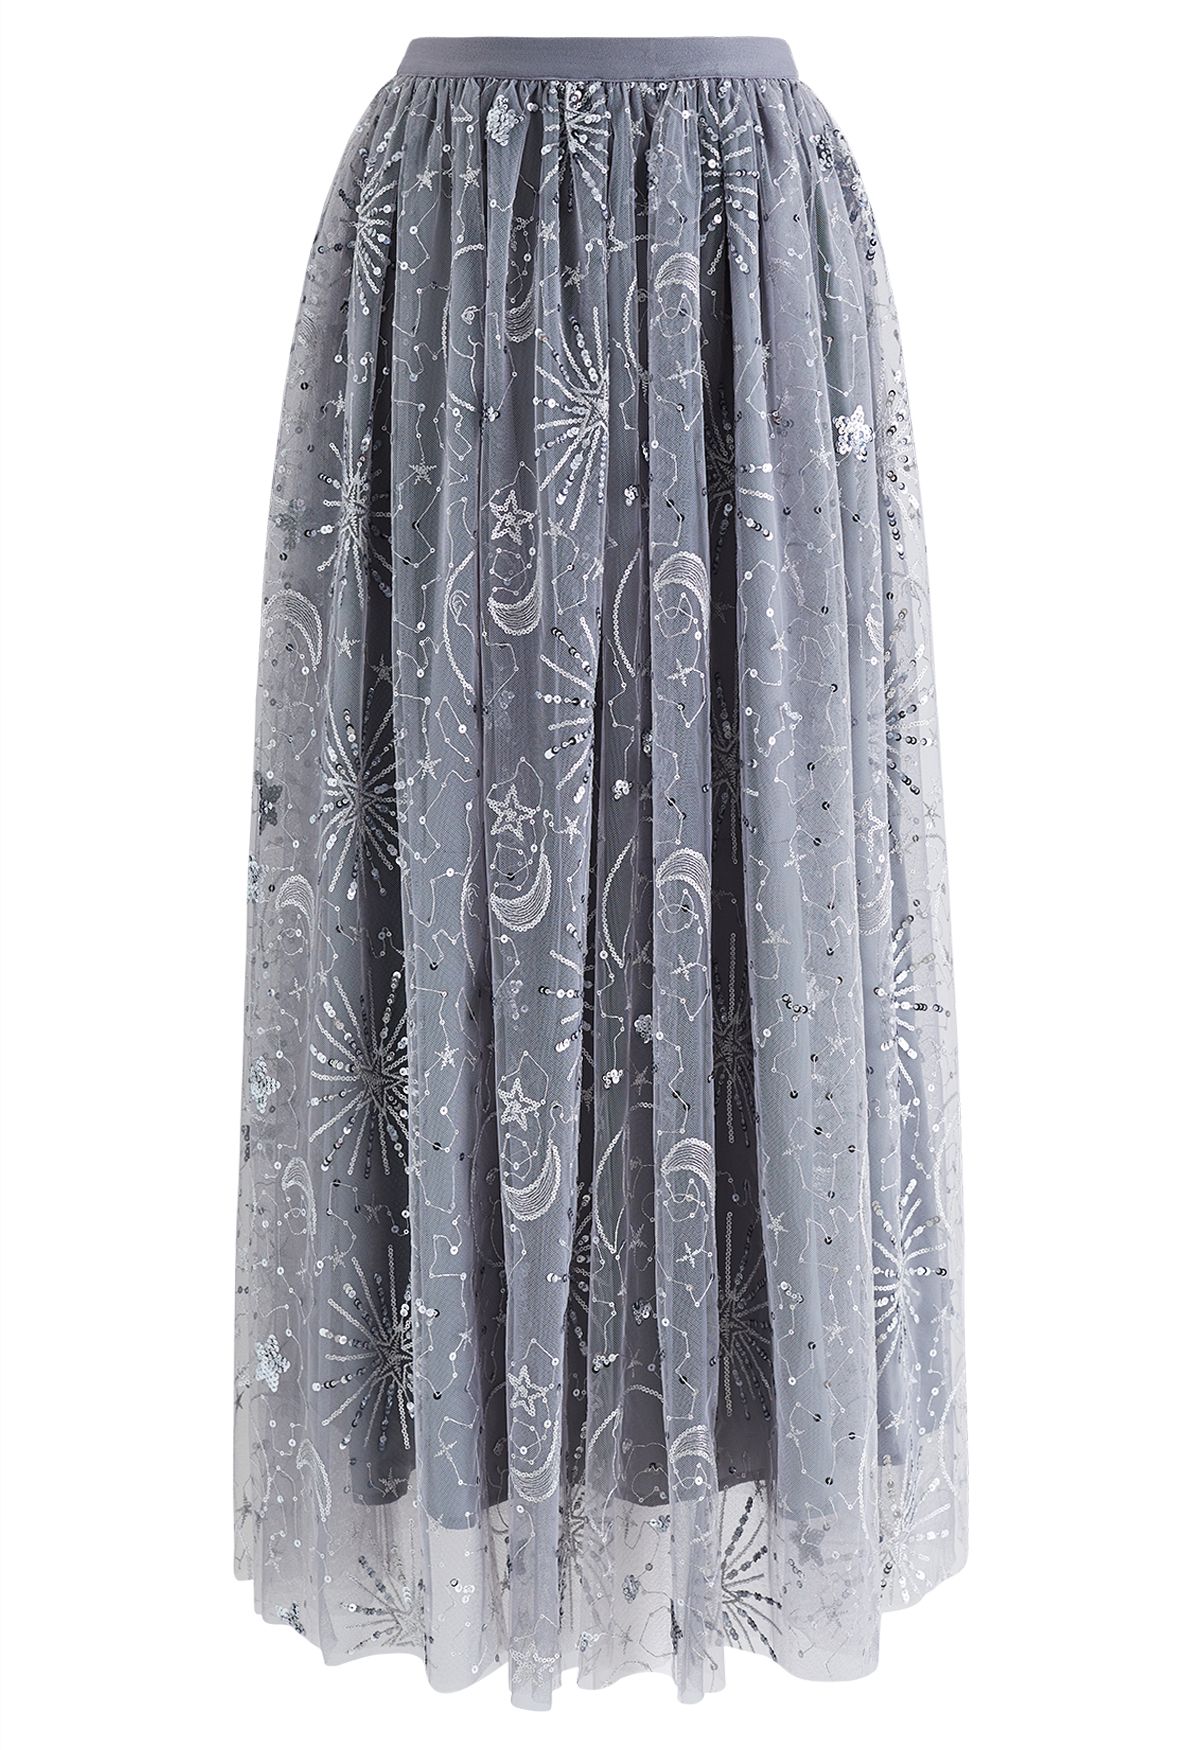 Chicwish Grey Tulle Skirt and Lace Crop Top  Tulle skirt, Stylish petite,  Grey tulle skirt